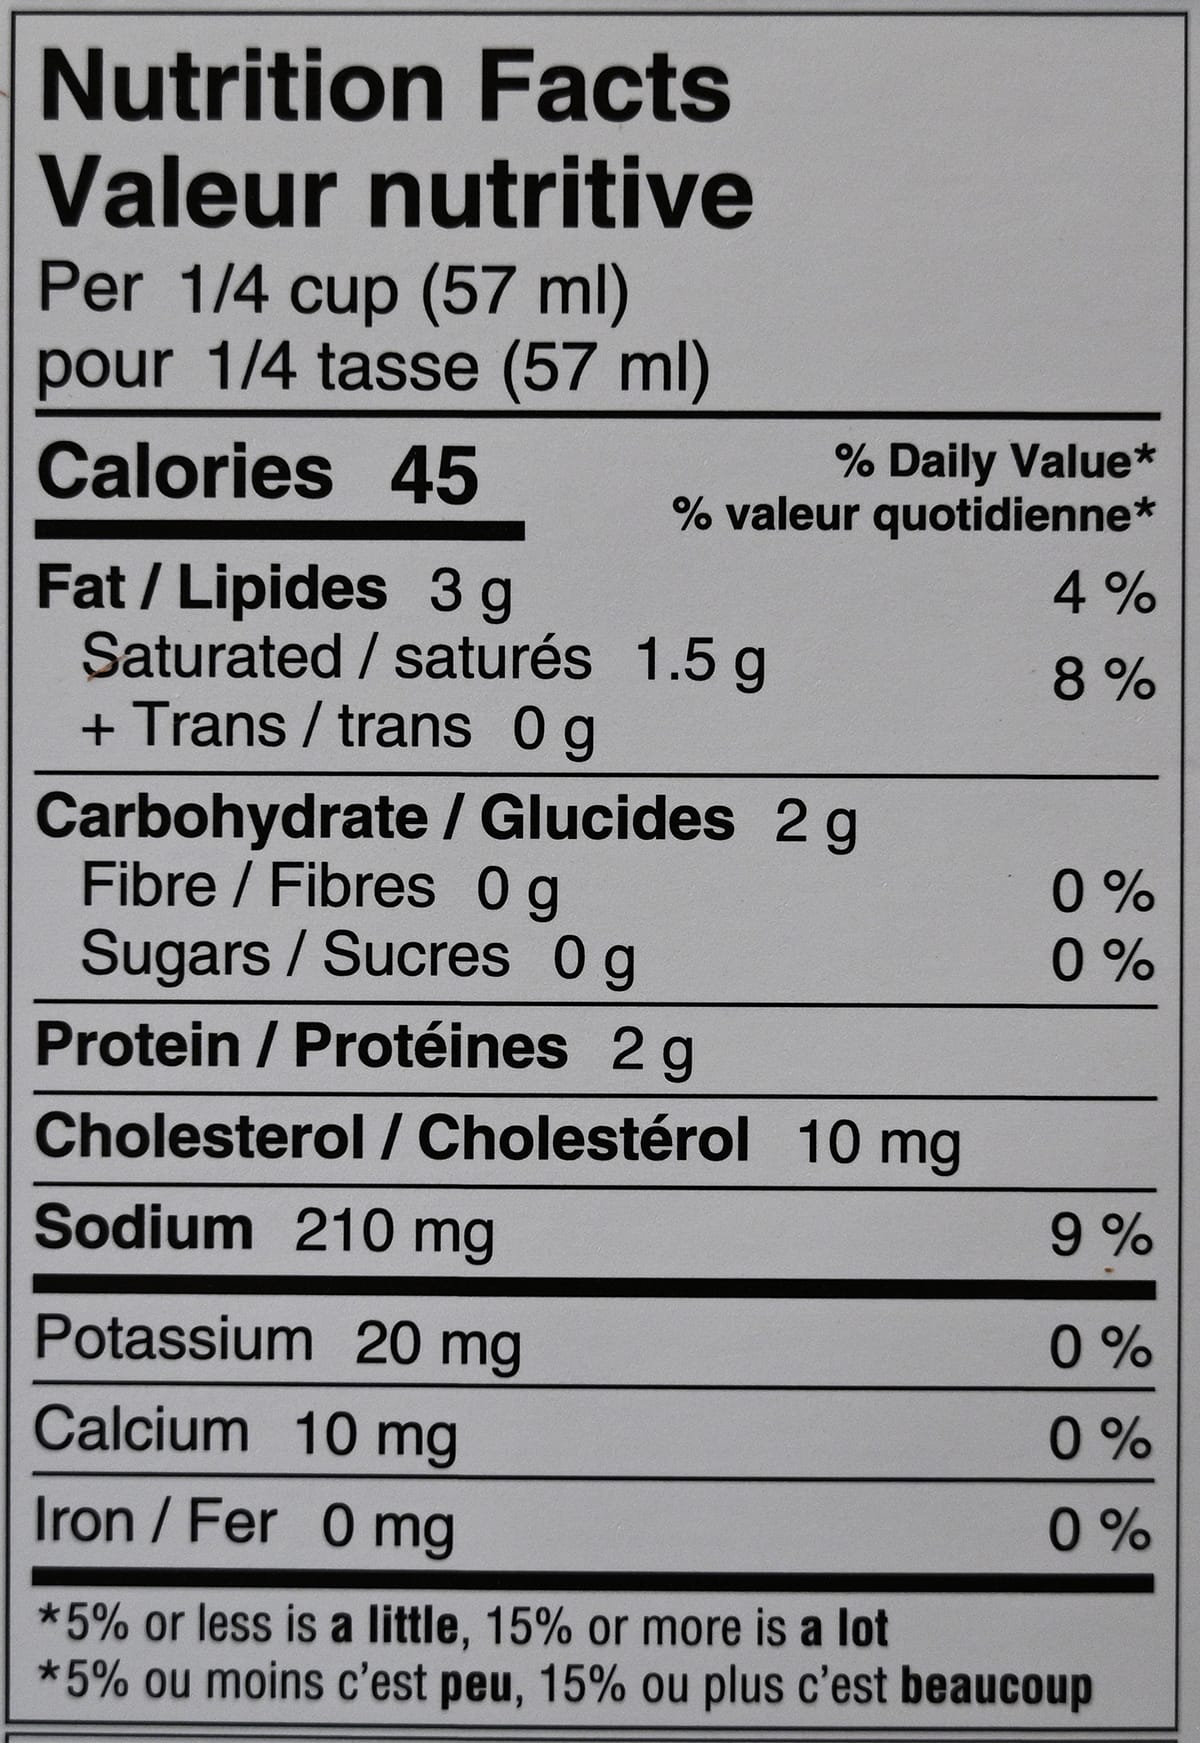 Image of the nutrition facts from the back of the package.